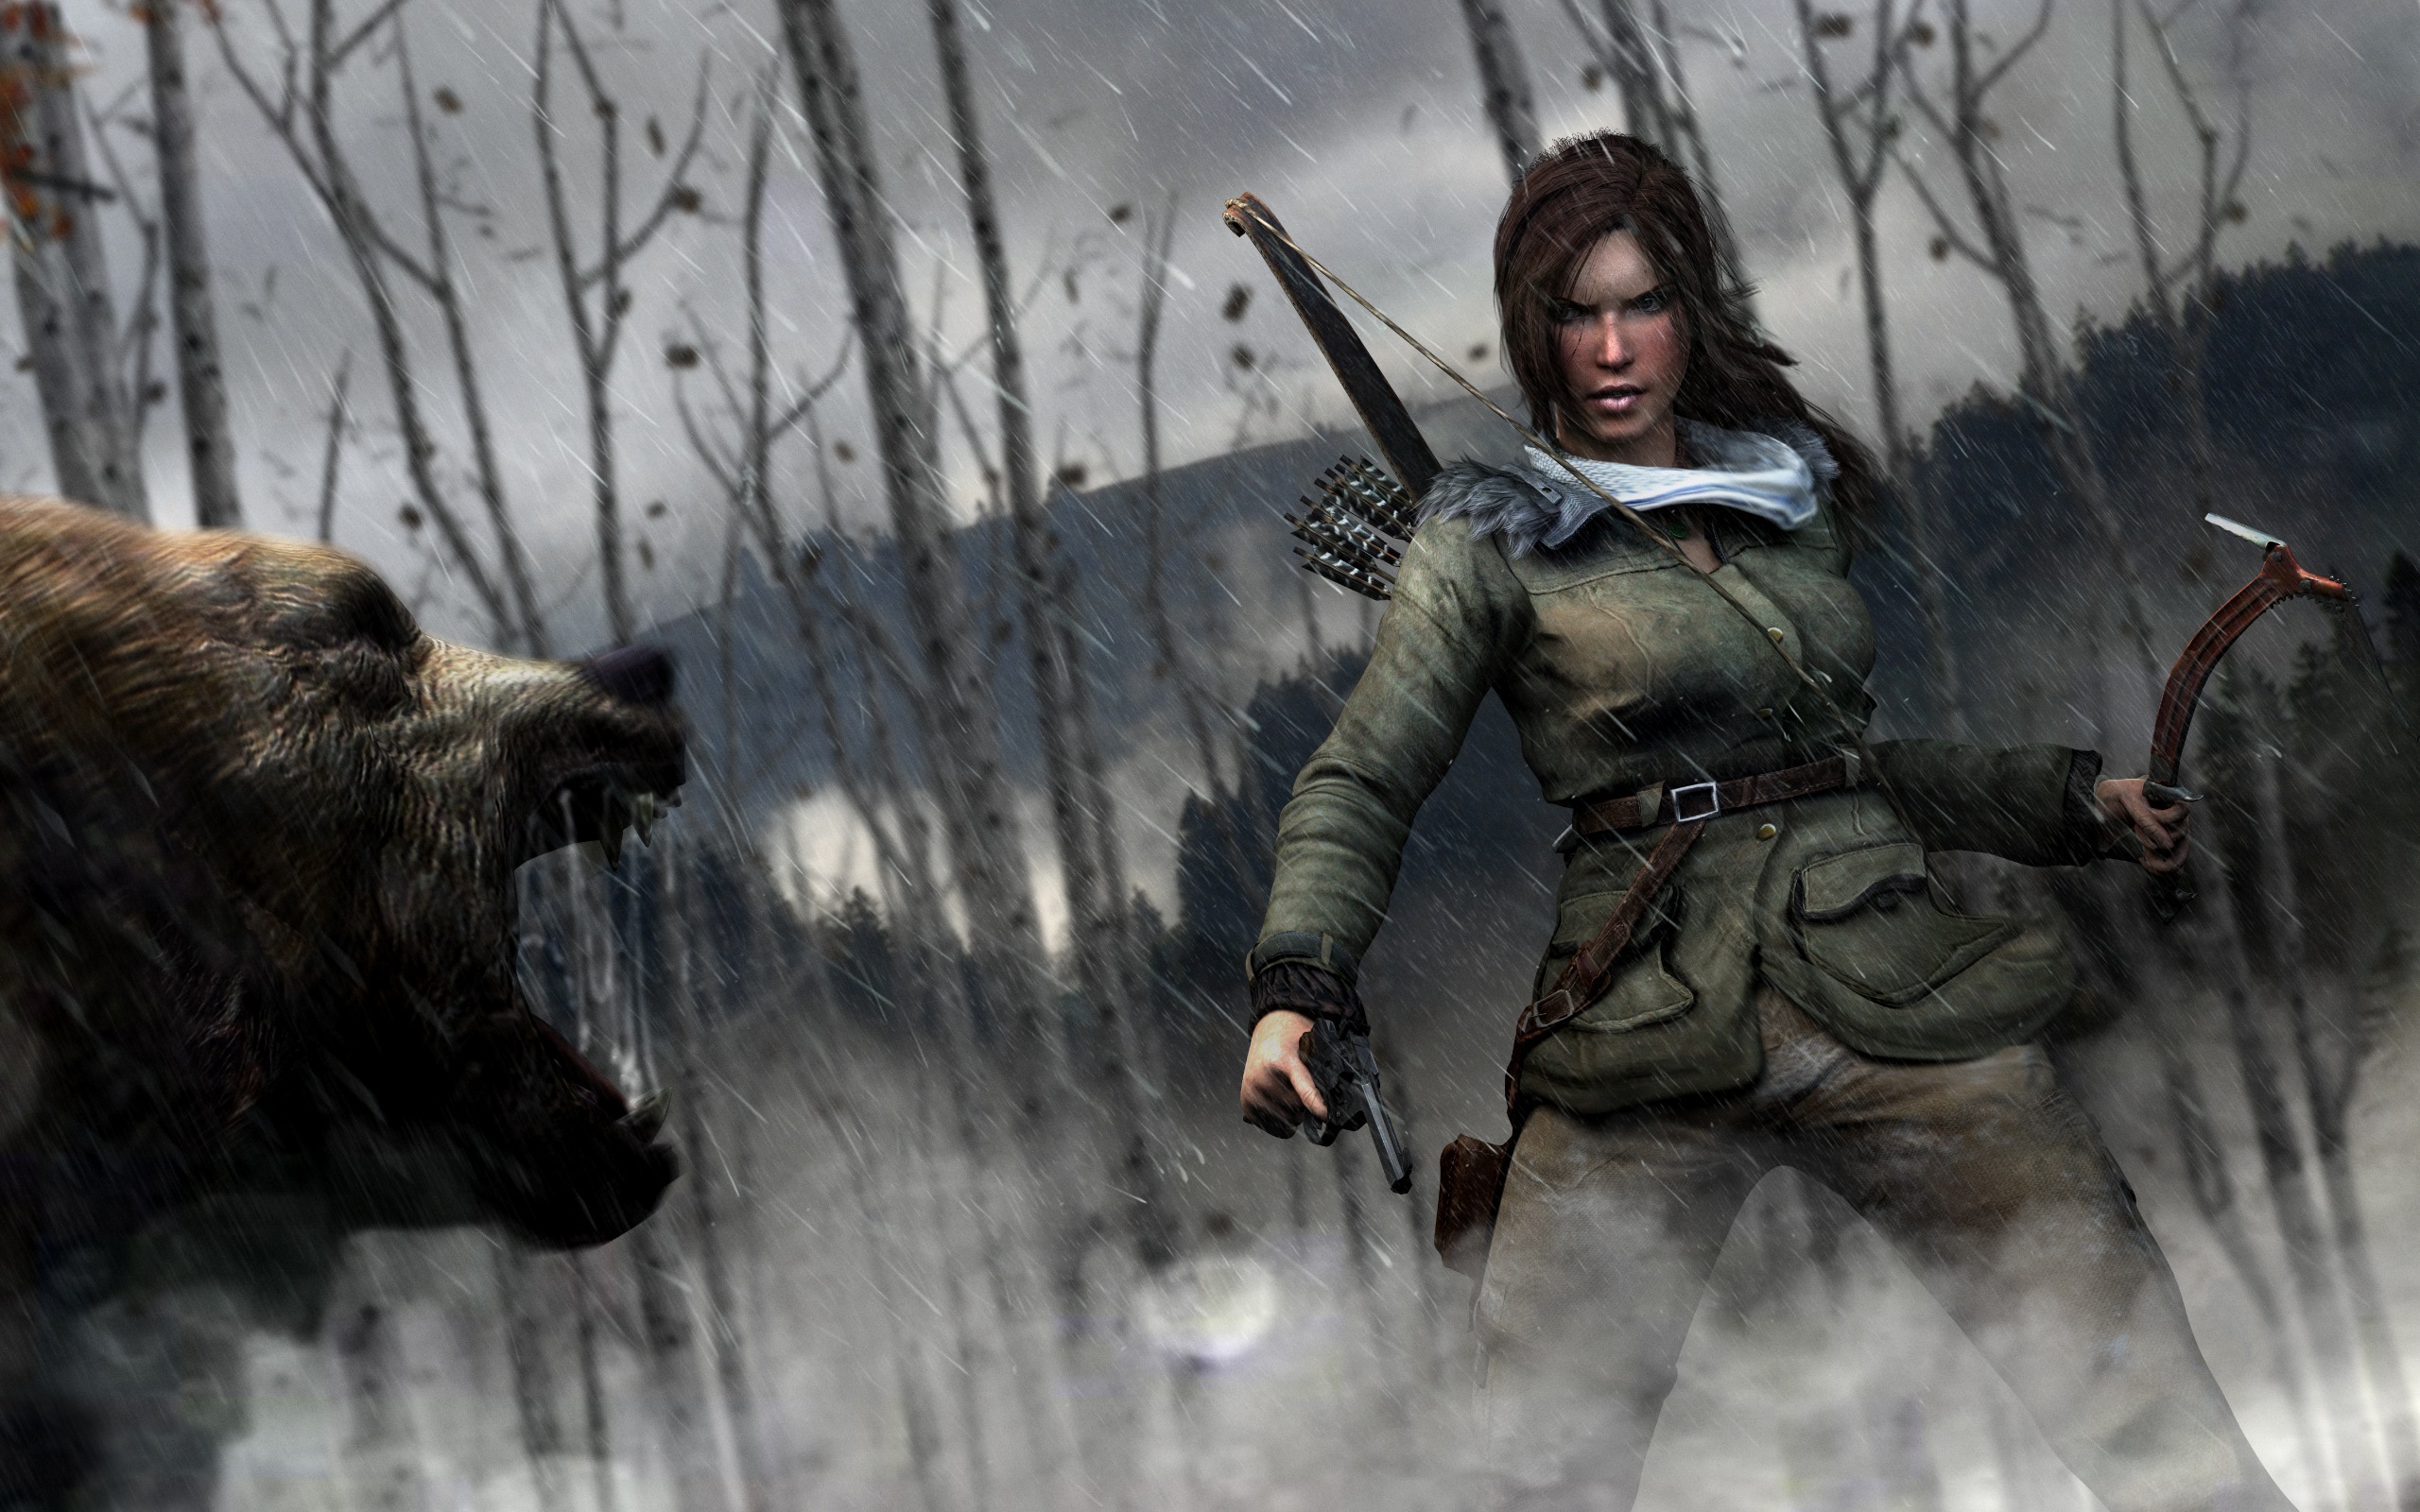  30 2015 By admin Comments Off on Rise of Tomb Raider Wallpaper HD